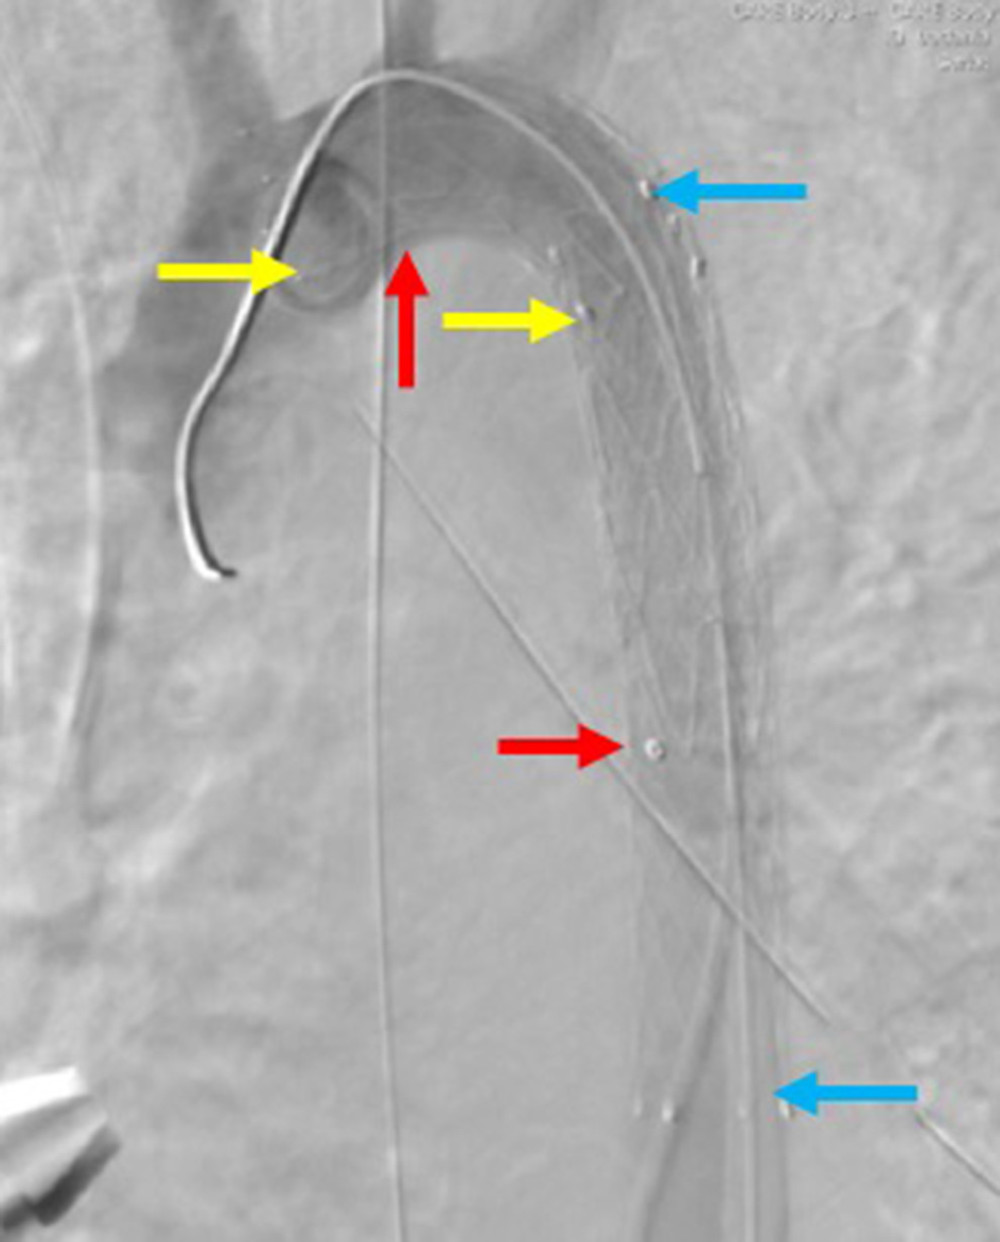 Final result of primary endovascular intervention. Blue arrows: covered stent (Fluency, 14/80 mm, Bard, Murray Hill, USA); Red arrows: iliac stentgraft (15/16×93 mm, Jotec, Hechingen, Germany); Yellow arrows: self-expandable stent (Protégé GPS, 14/16 mm, Medtronic, Minneapolis, USA).